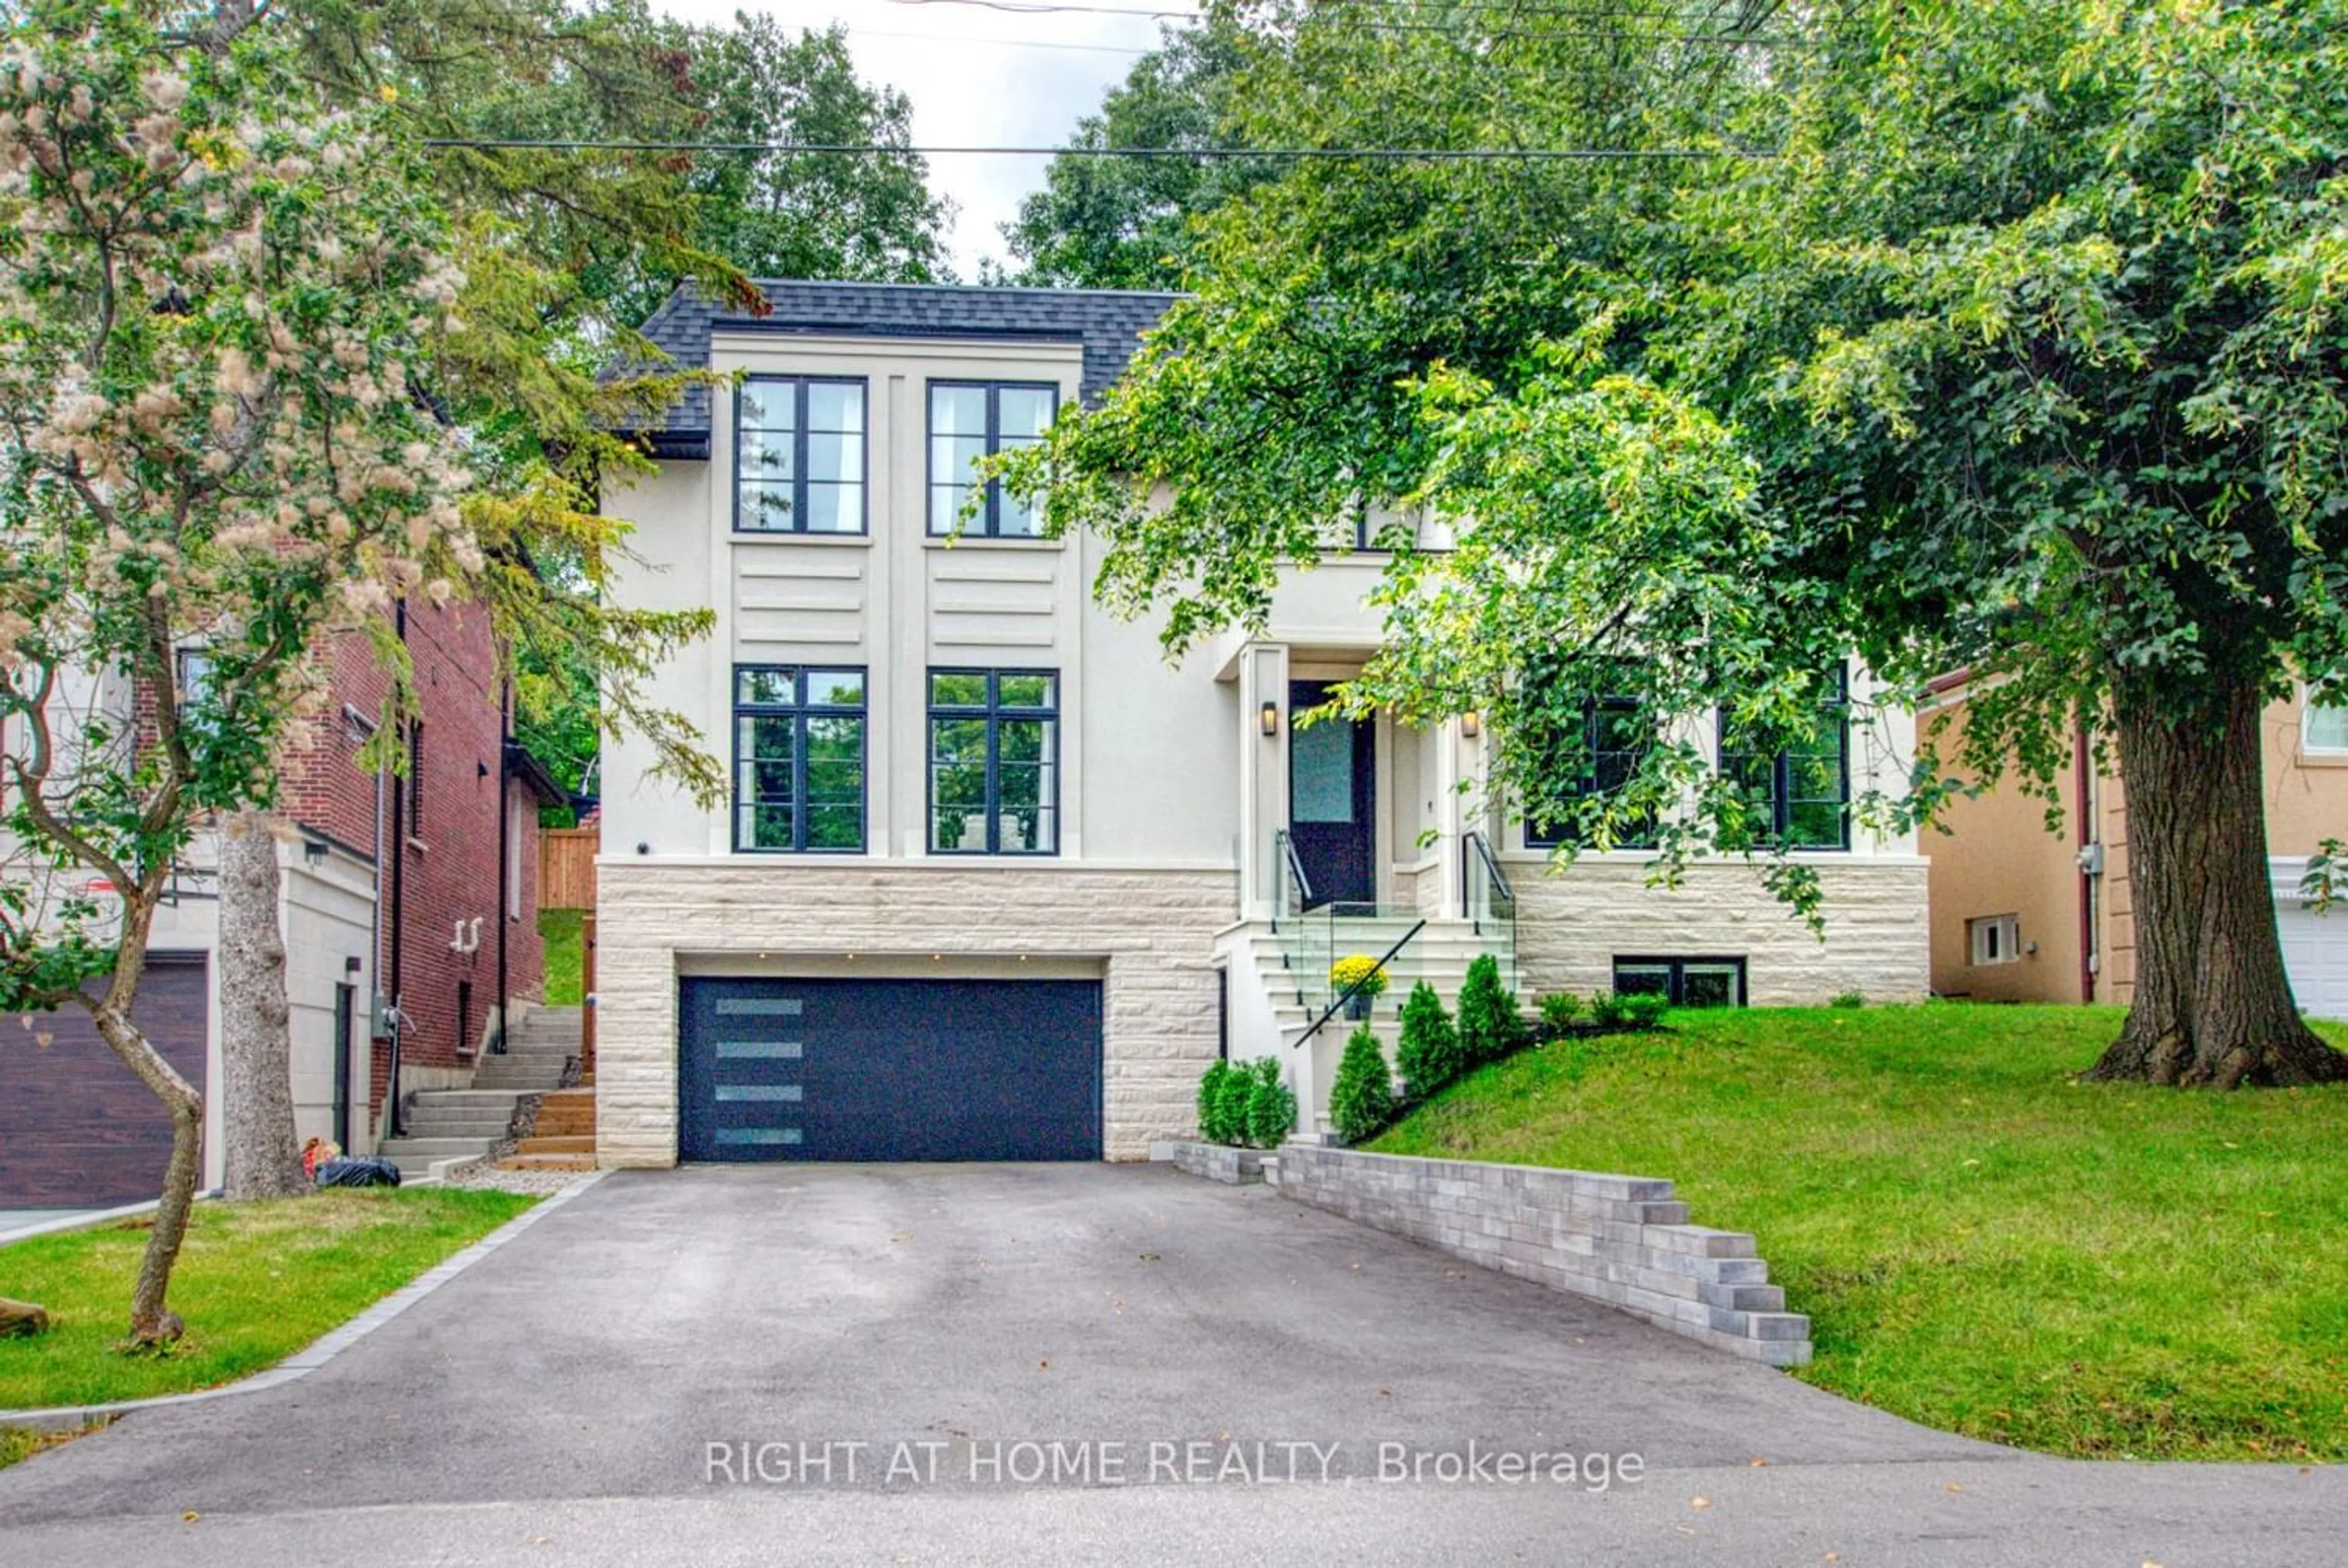 Home with brick exterior material for 29 Leland Ave, Toronto Ontario M8Z 2X6